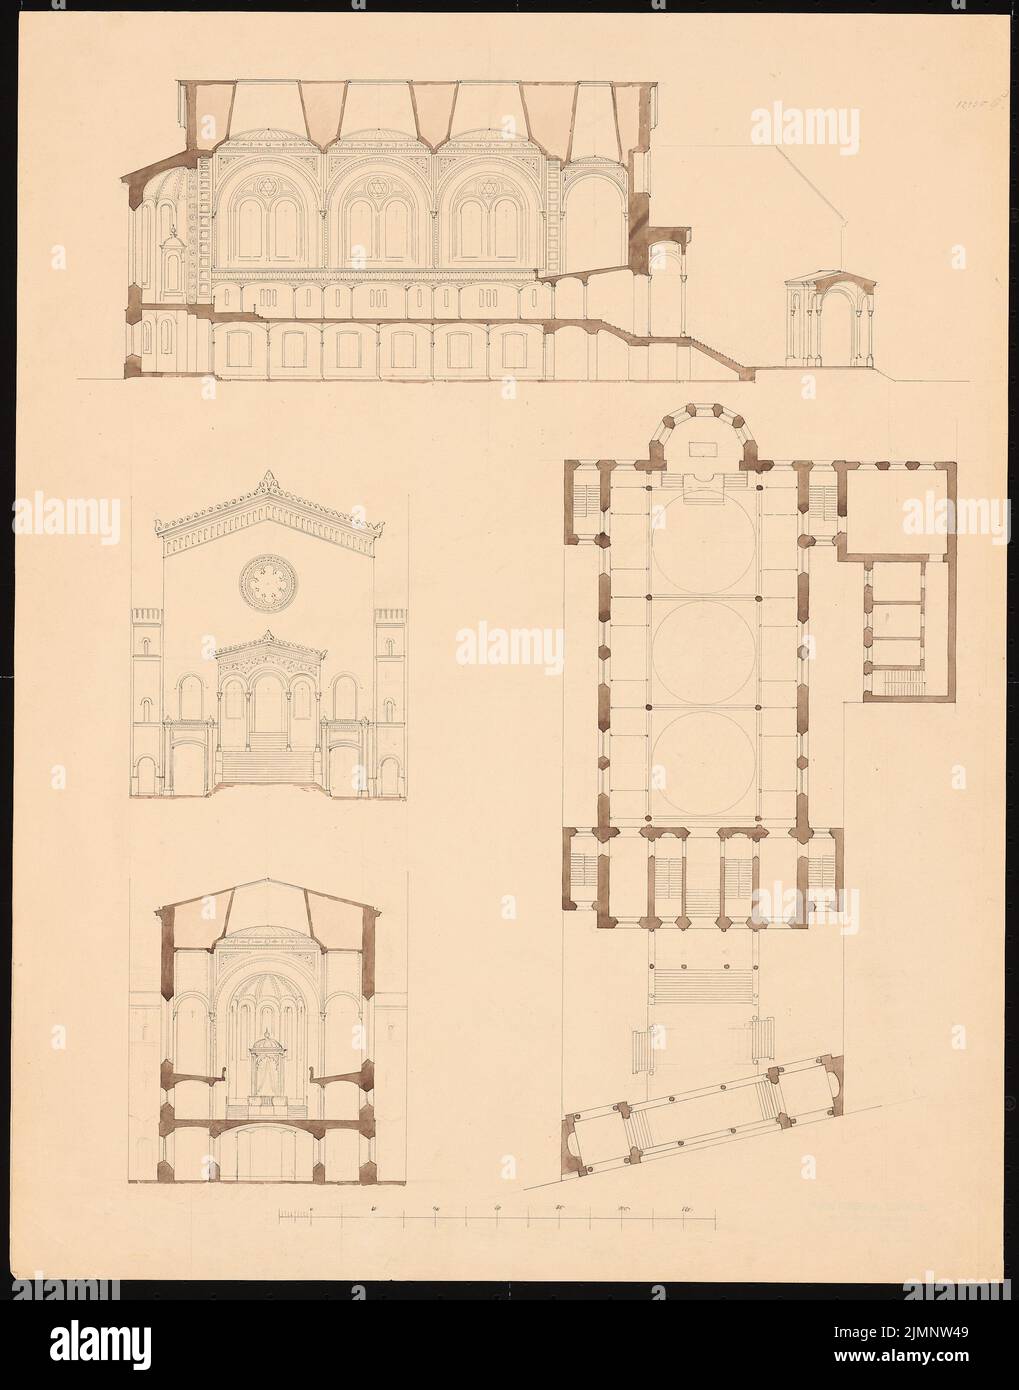 Knoblauch Eduard (1801-1865), new synagogue, Berlin. Preliminary studies (approx. 1856?): View floor plan, cuts. Tusche watercolor, 55.3 x 43.4 cm (including scan edges) Knoblauch Eduard  (1801-1865): Neue Synagoge, Berlin. Vorstudien Stock Photo